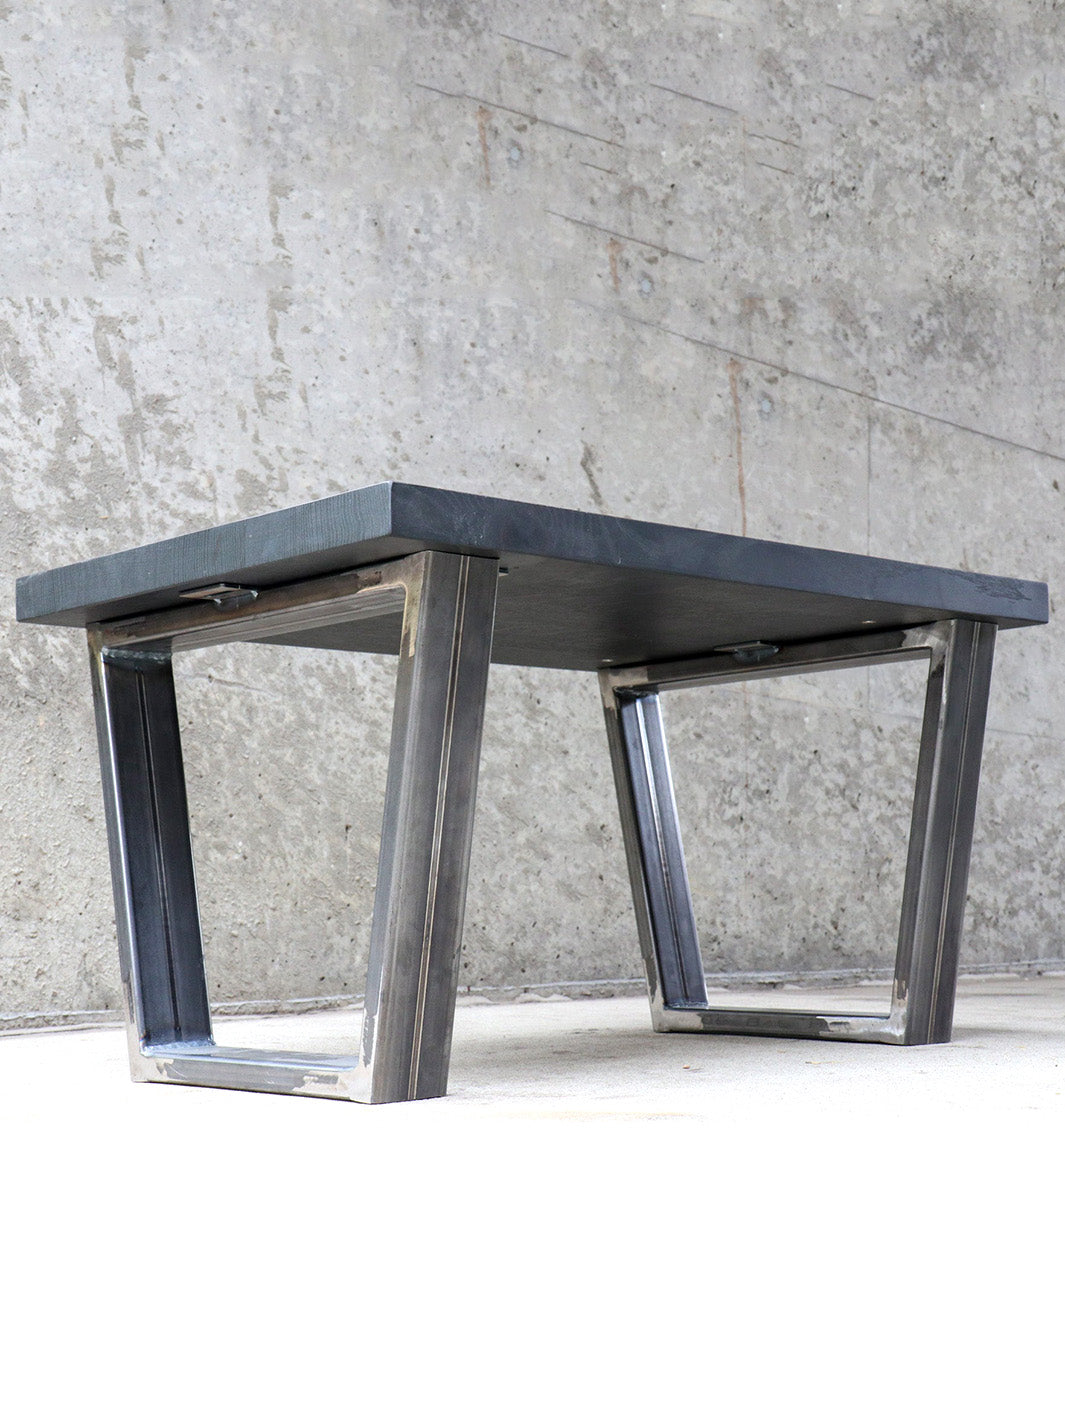 Modern Black Quartersawn White Oak and Steel Coffee Table Earthly Comfort Coffee Tables 961-3